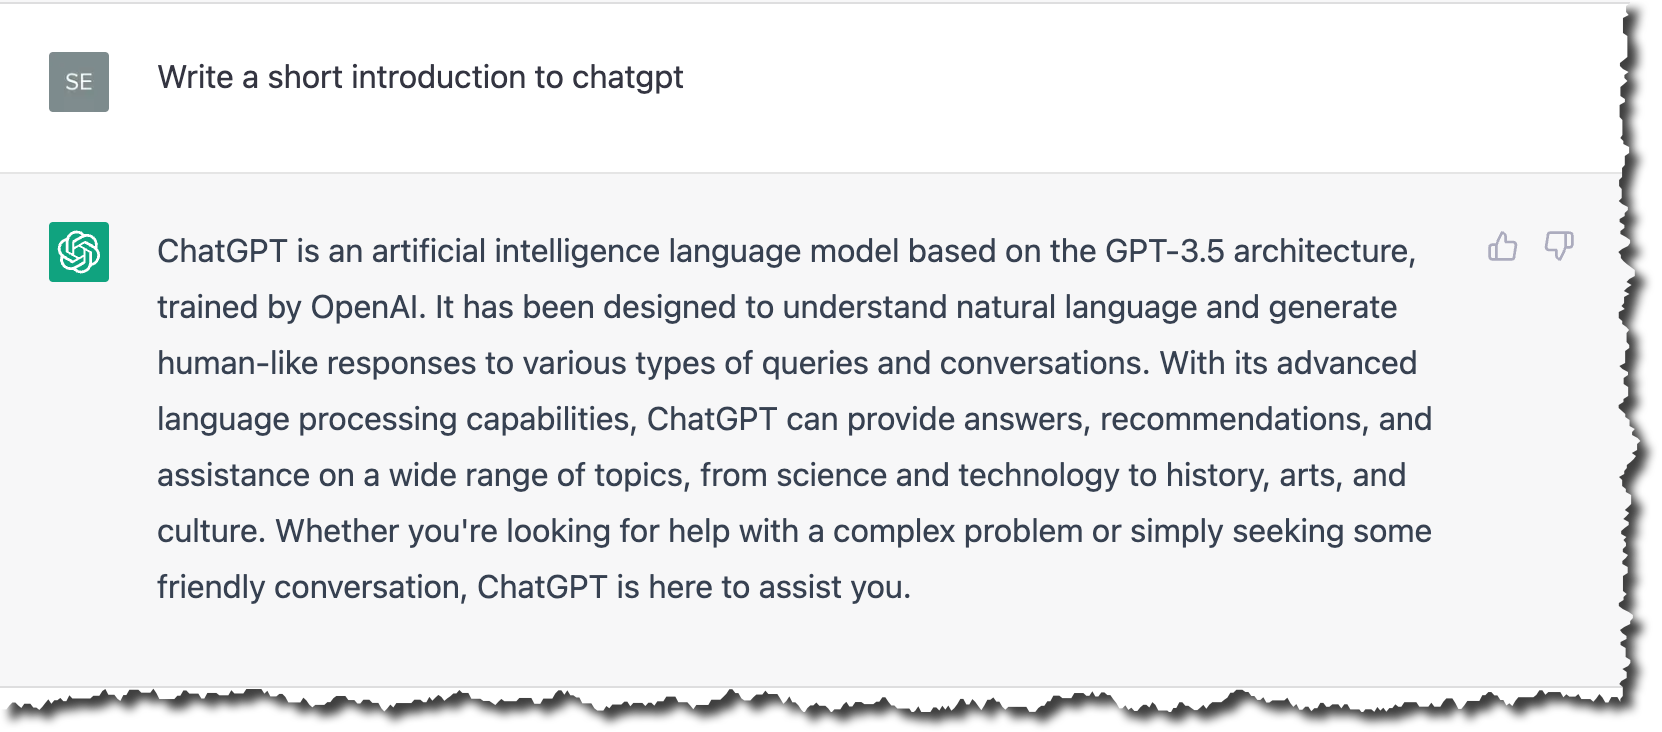 Image showing the screen capture of the ChatGPT response to the request 'Wite a short introduction to chatgpt'